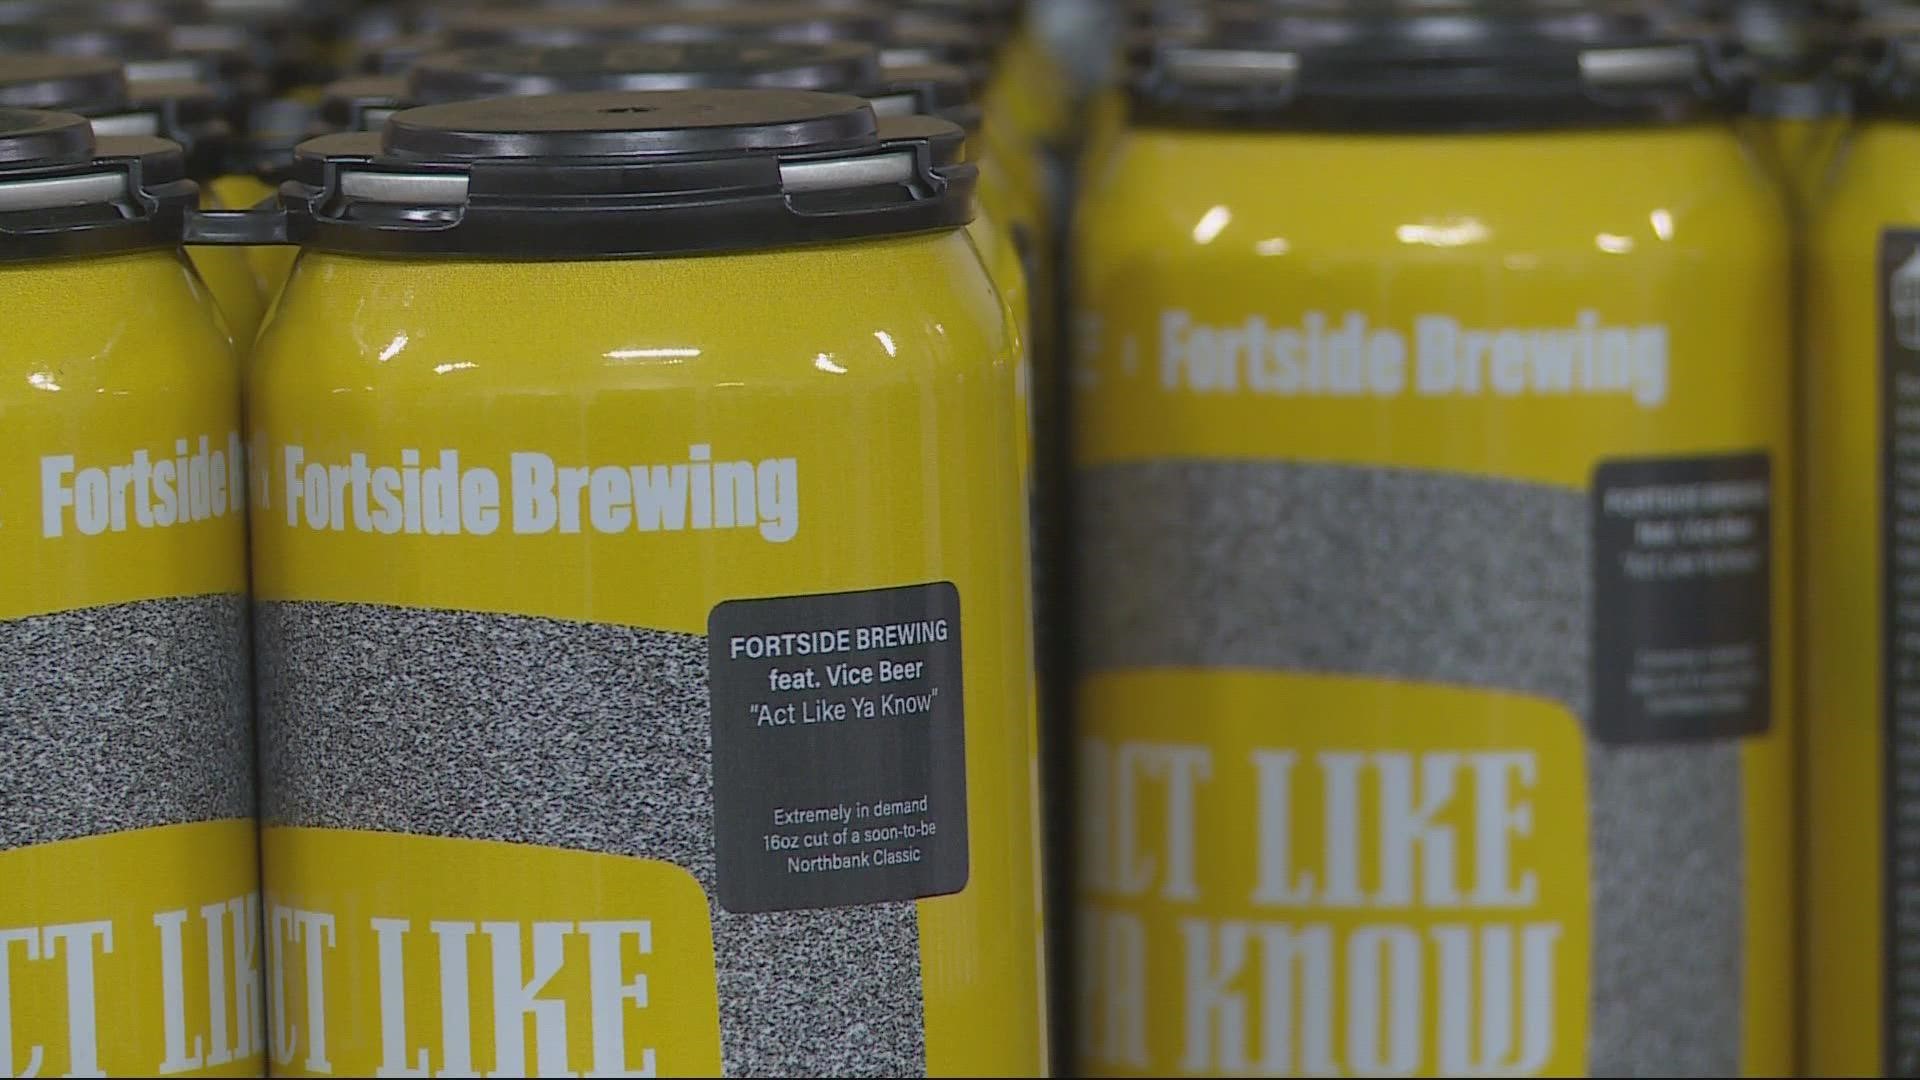 Fortside Brewing in Vancouver is one of three Washington breweries suing Oregon for its lopsided restrictions on how they can sell products in the state.